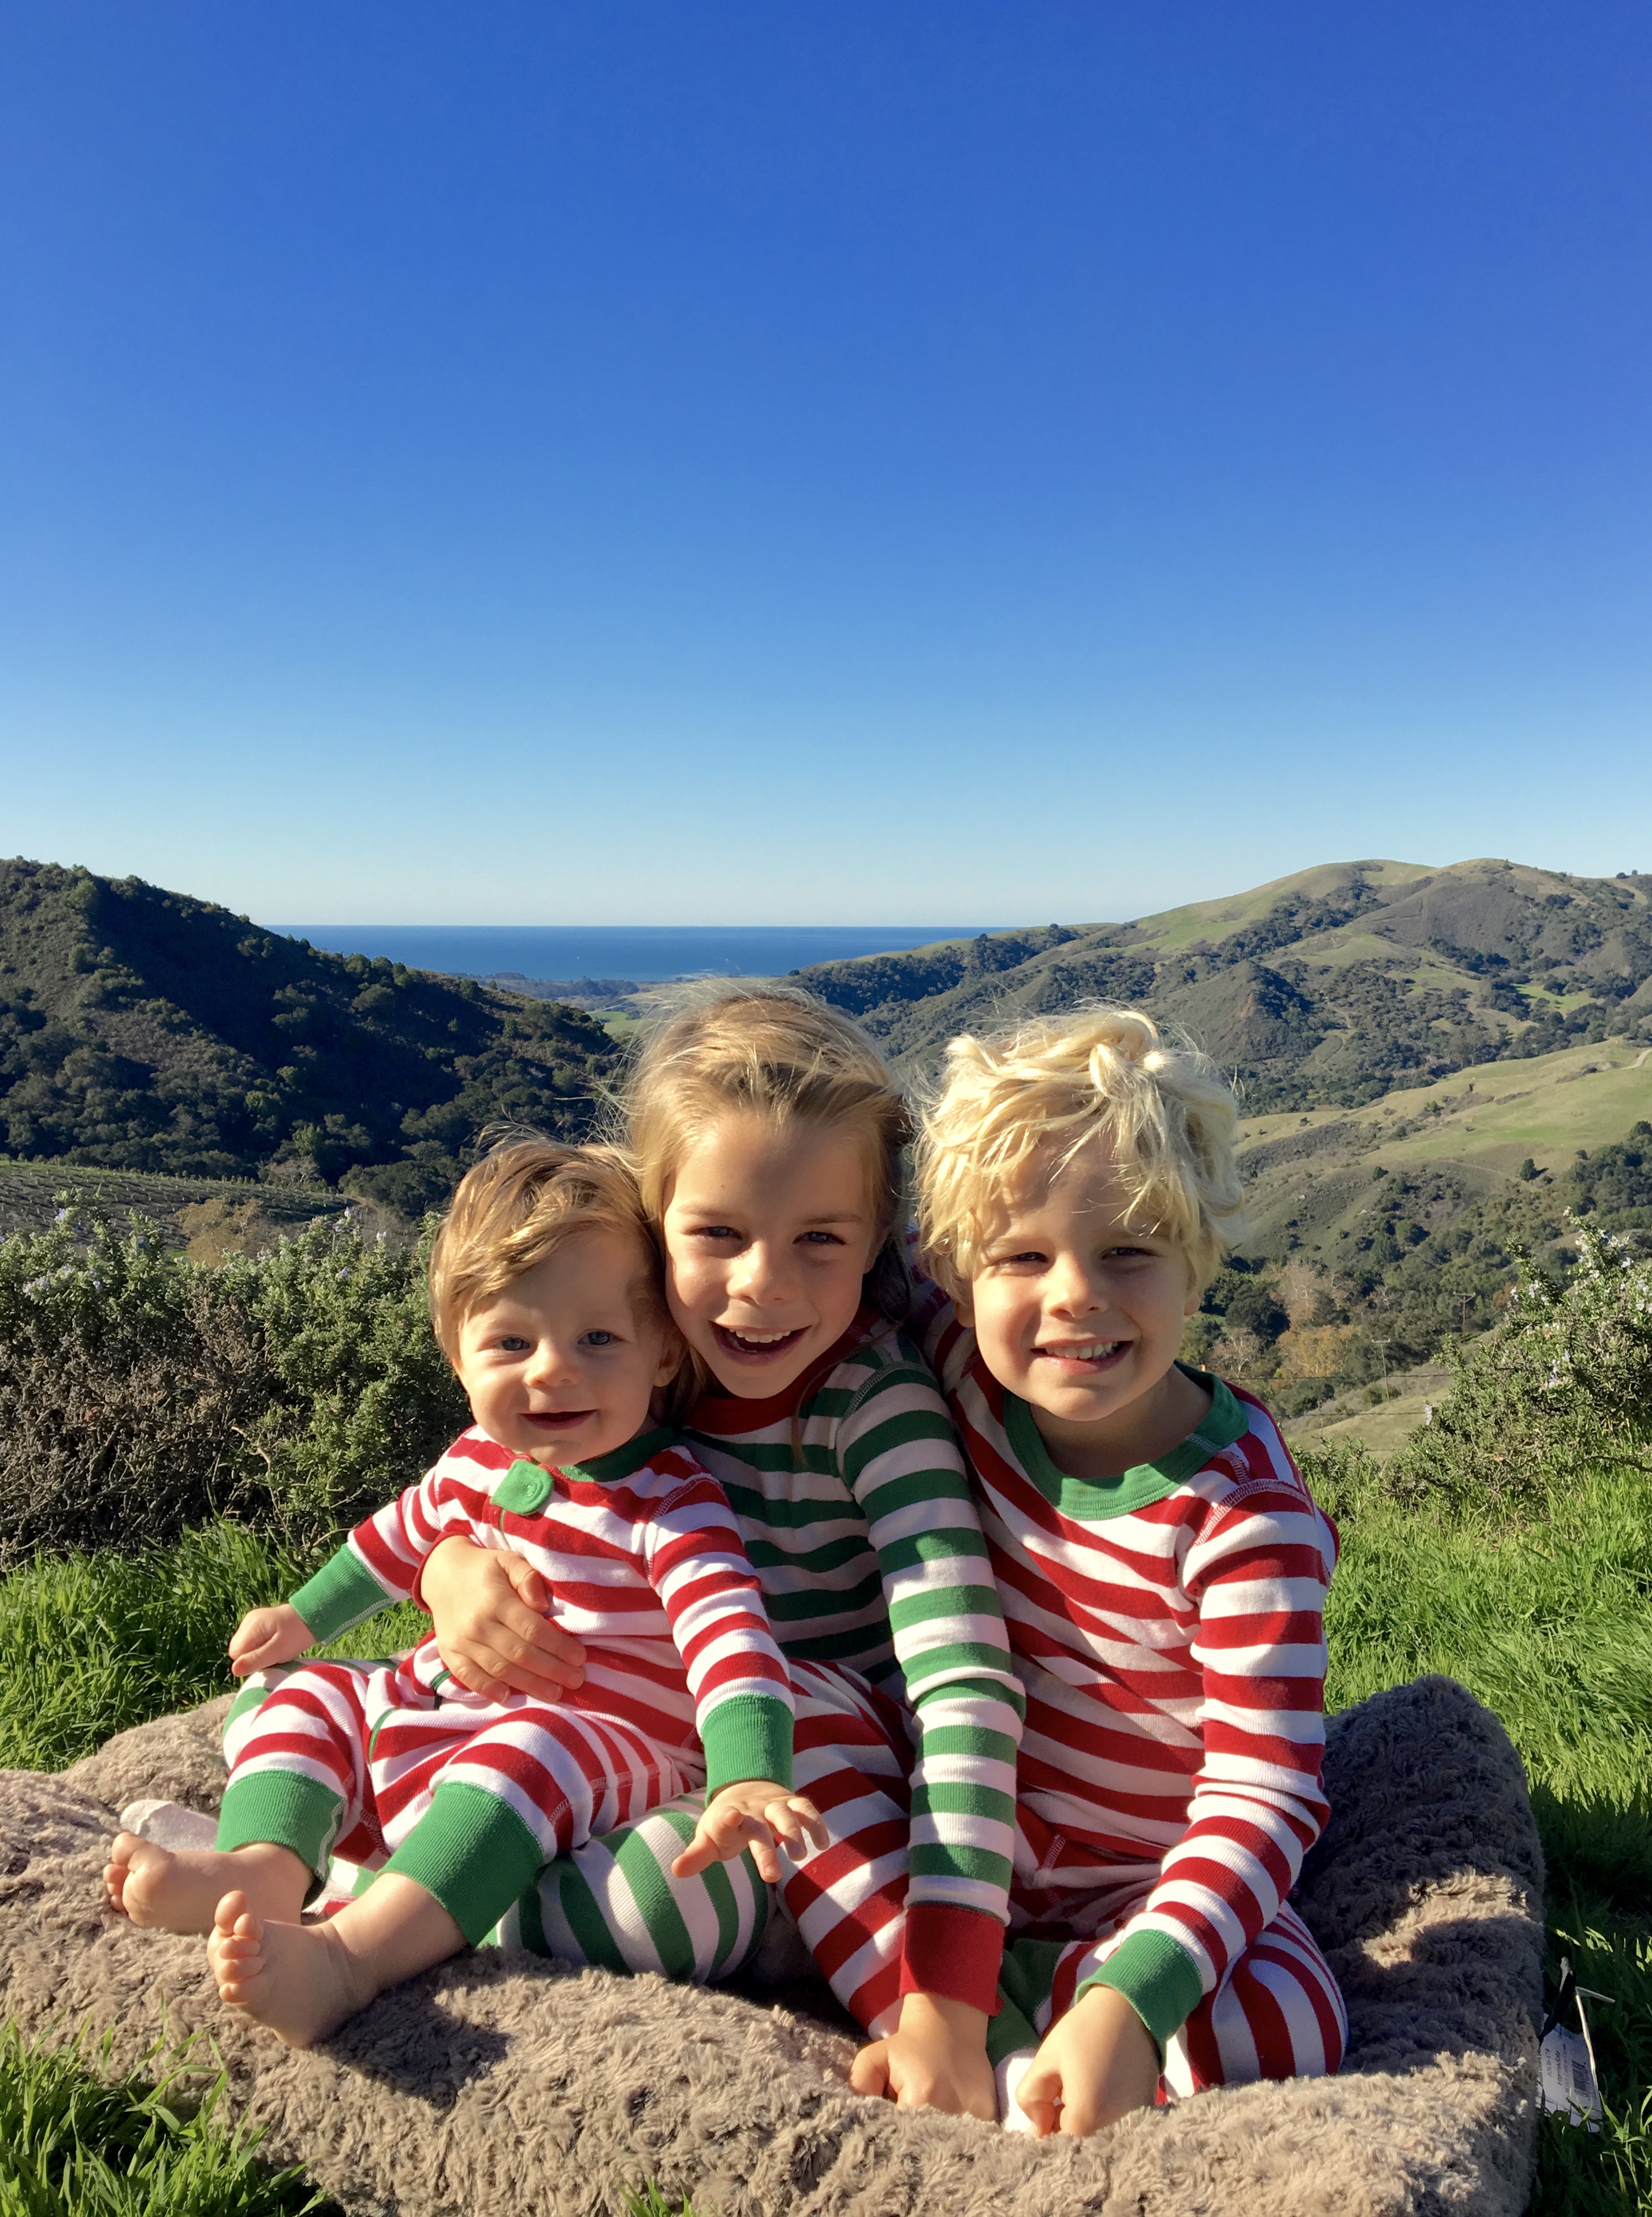 Merry Christmas from Lena (5), Gil (3), and Forest (7 months)! This photo was on the front of our Christmas card this year.